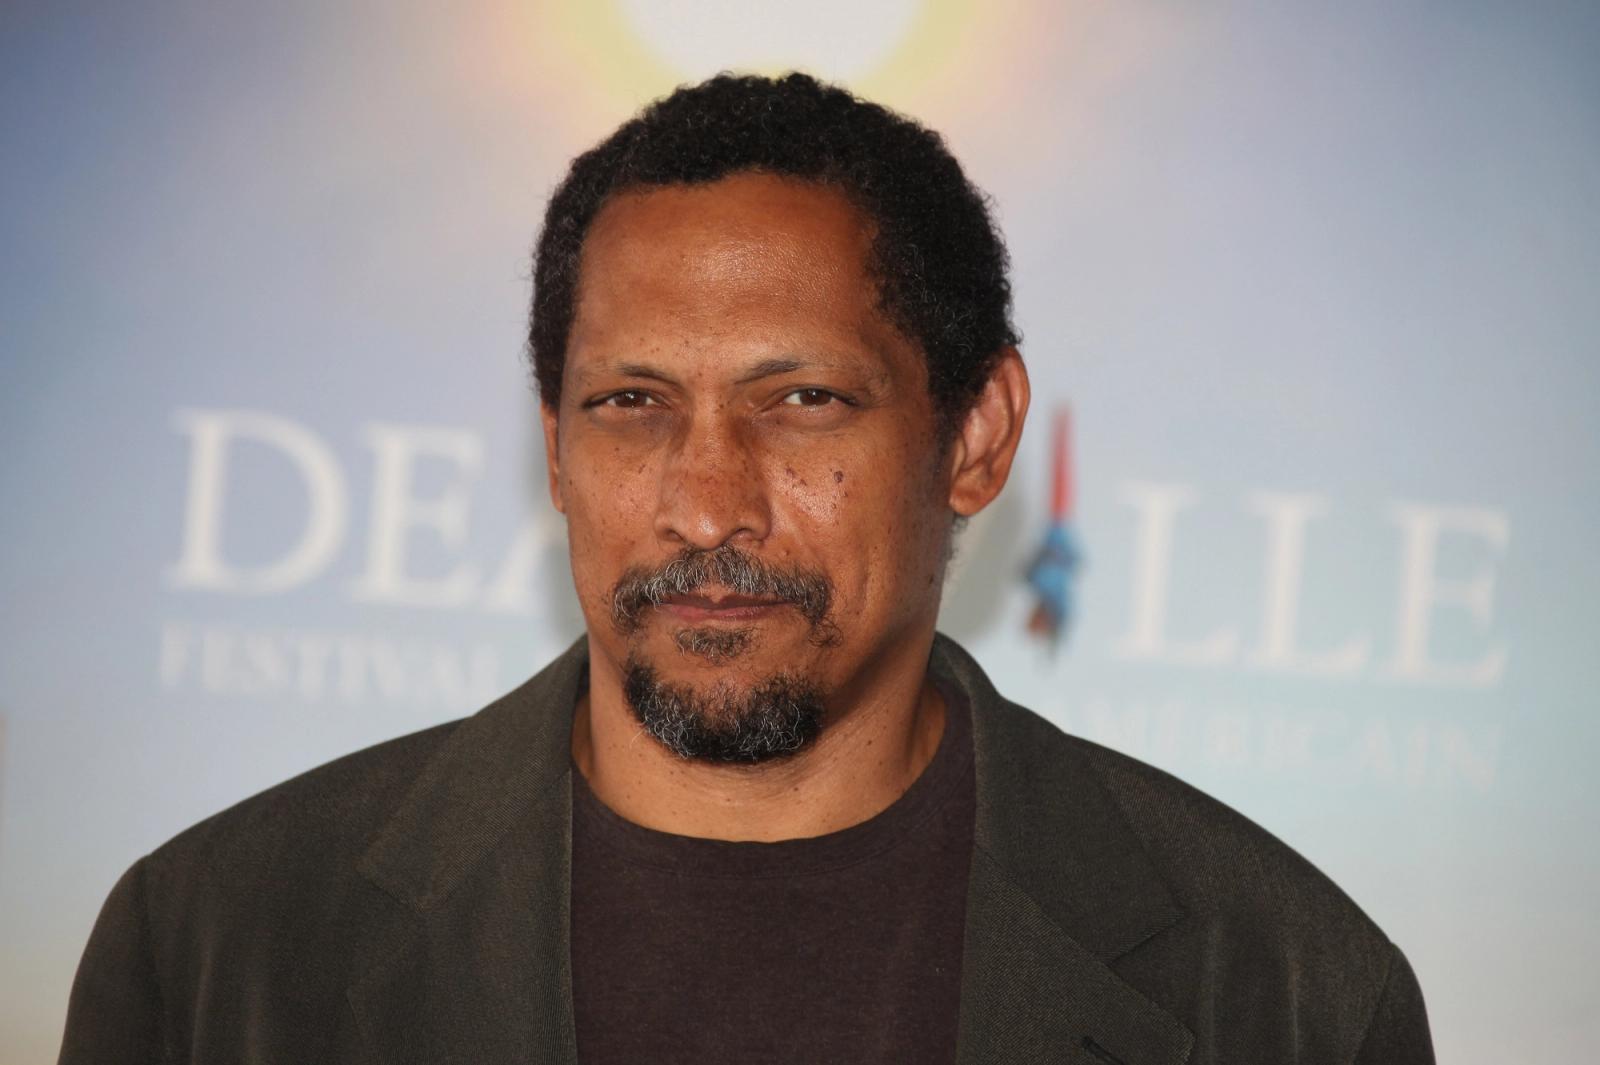 Percival Everett attending a photocall for his awarded book 'Not Sidney Poitier' during 'Deauville American Film Festival' in Deauville, France